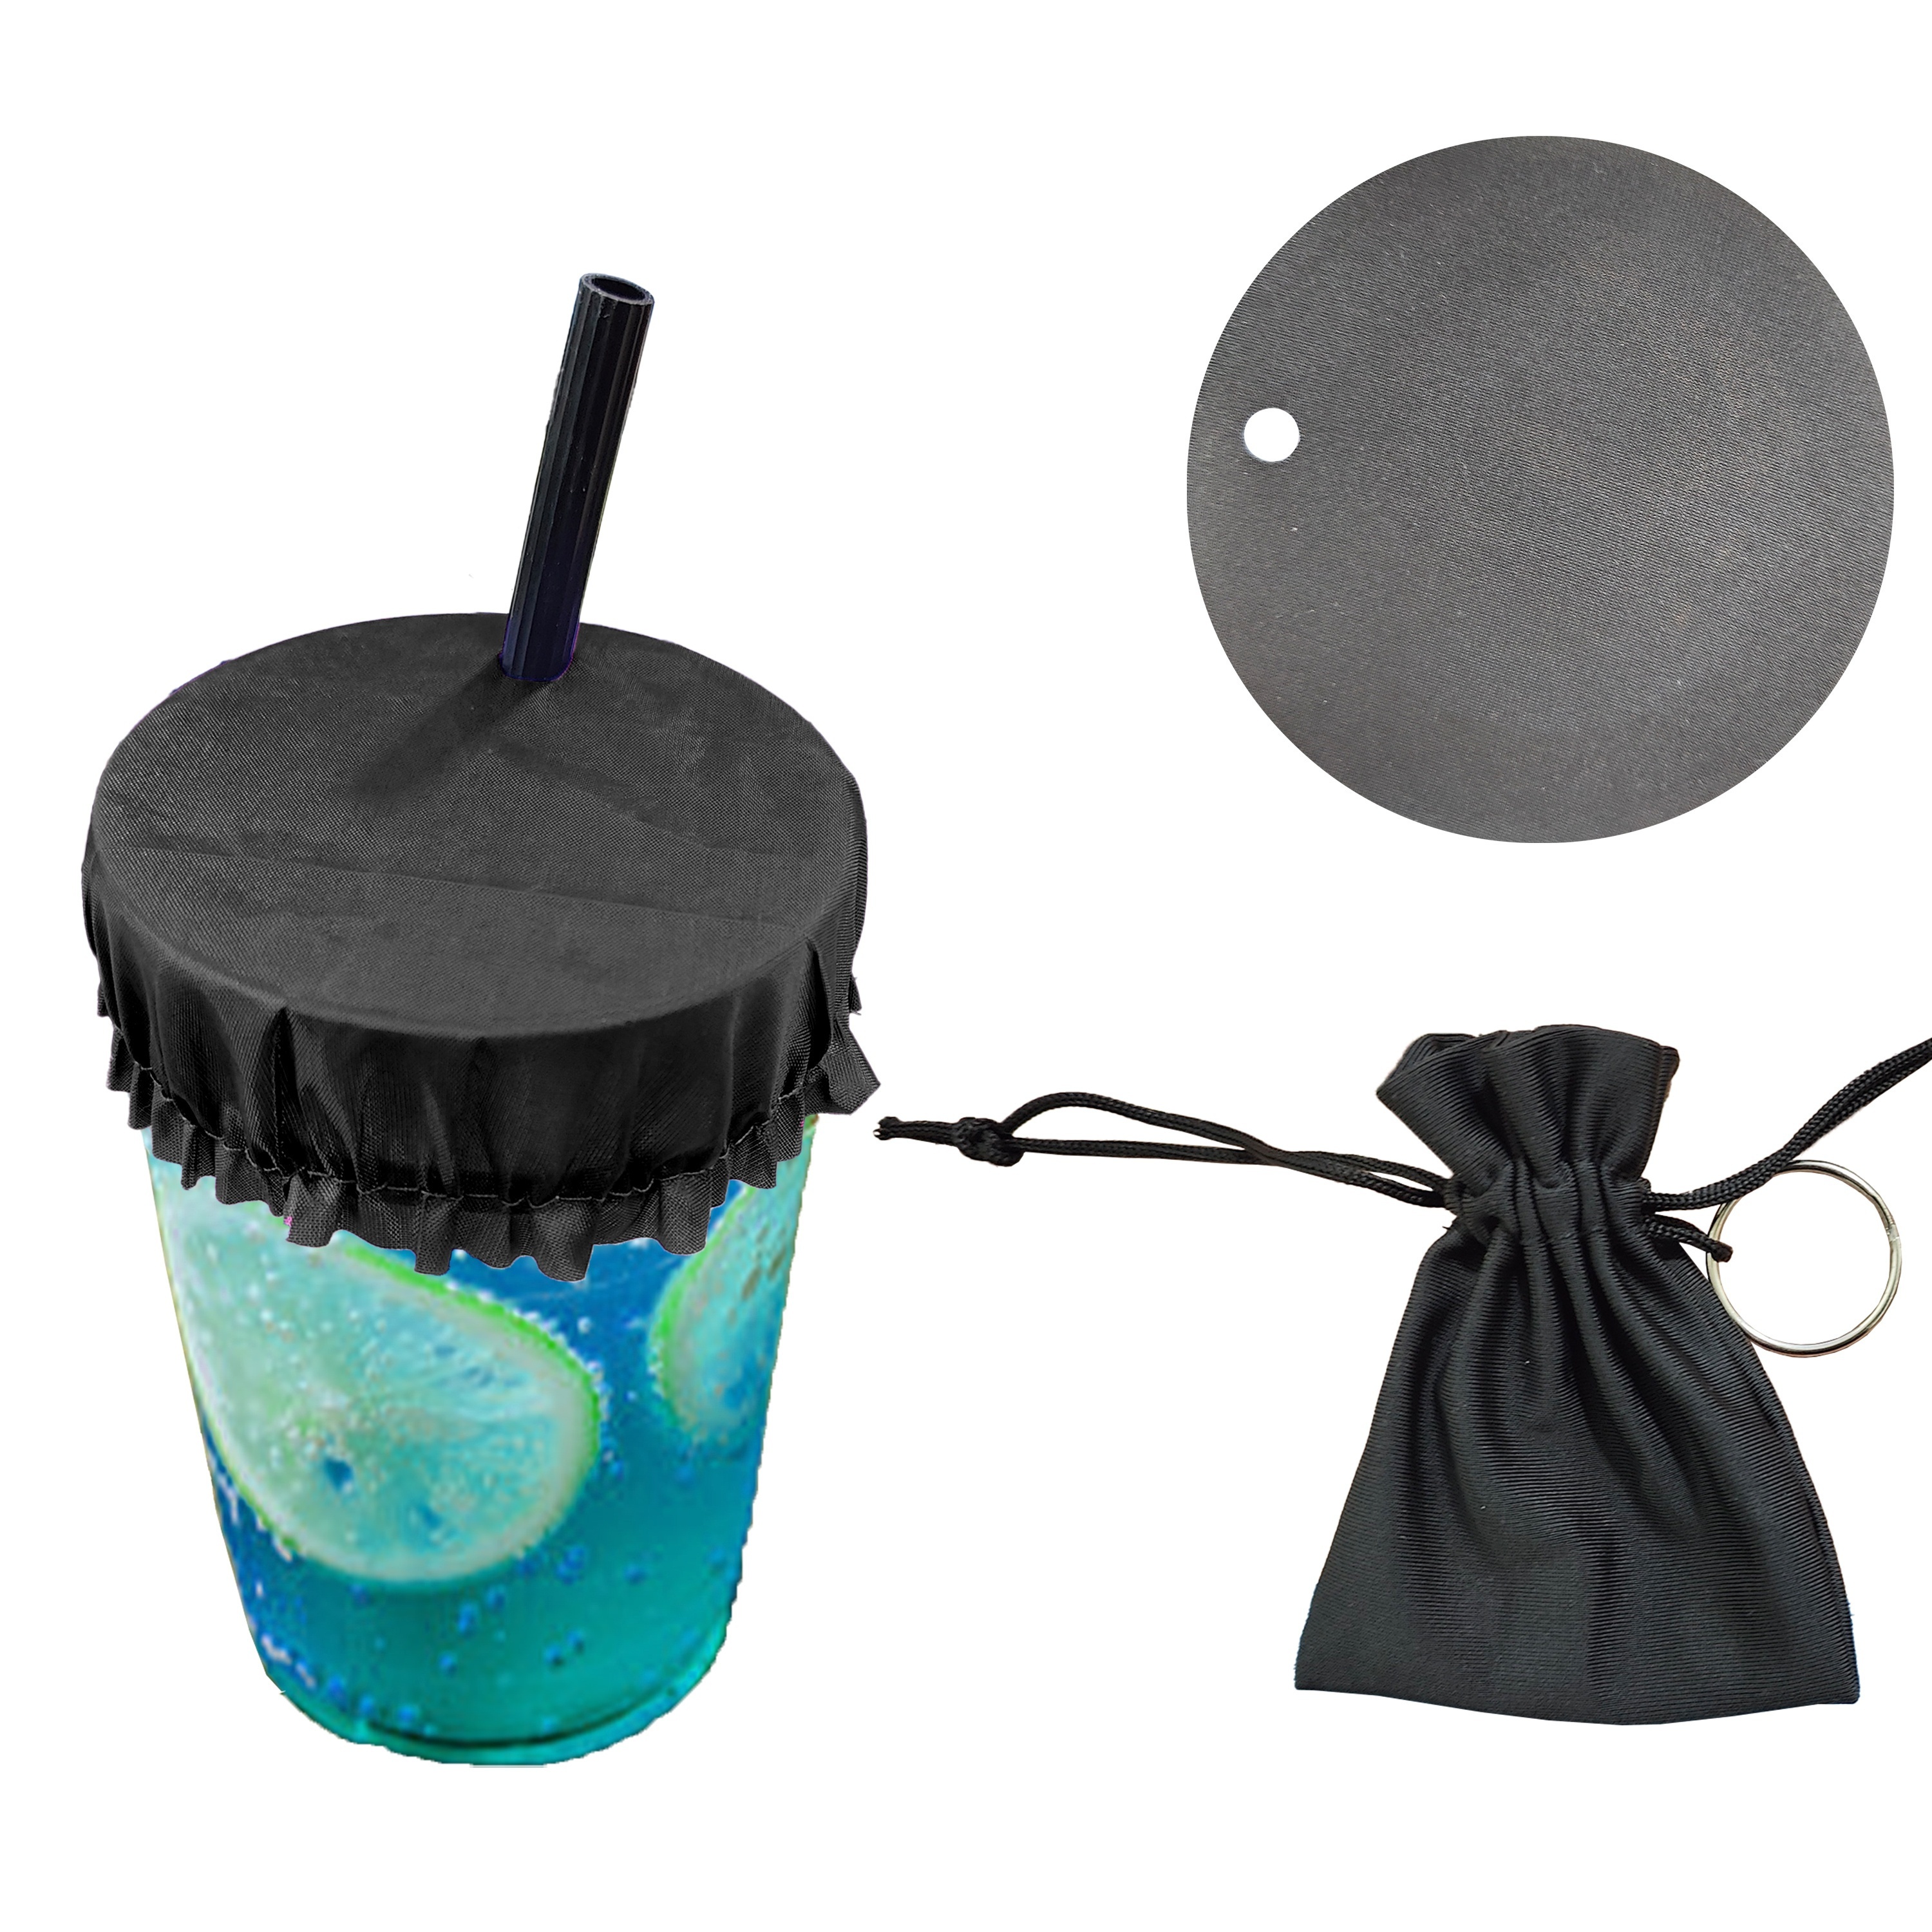 Reusable Drink Spiking Prevention Accessory In A Pouch With Key